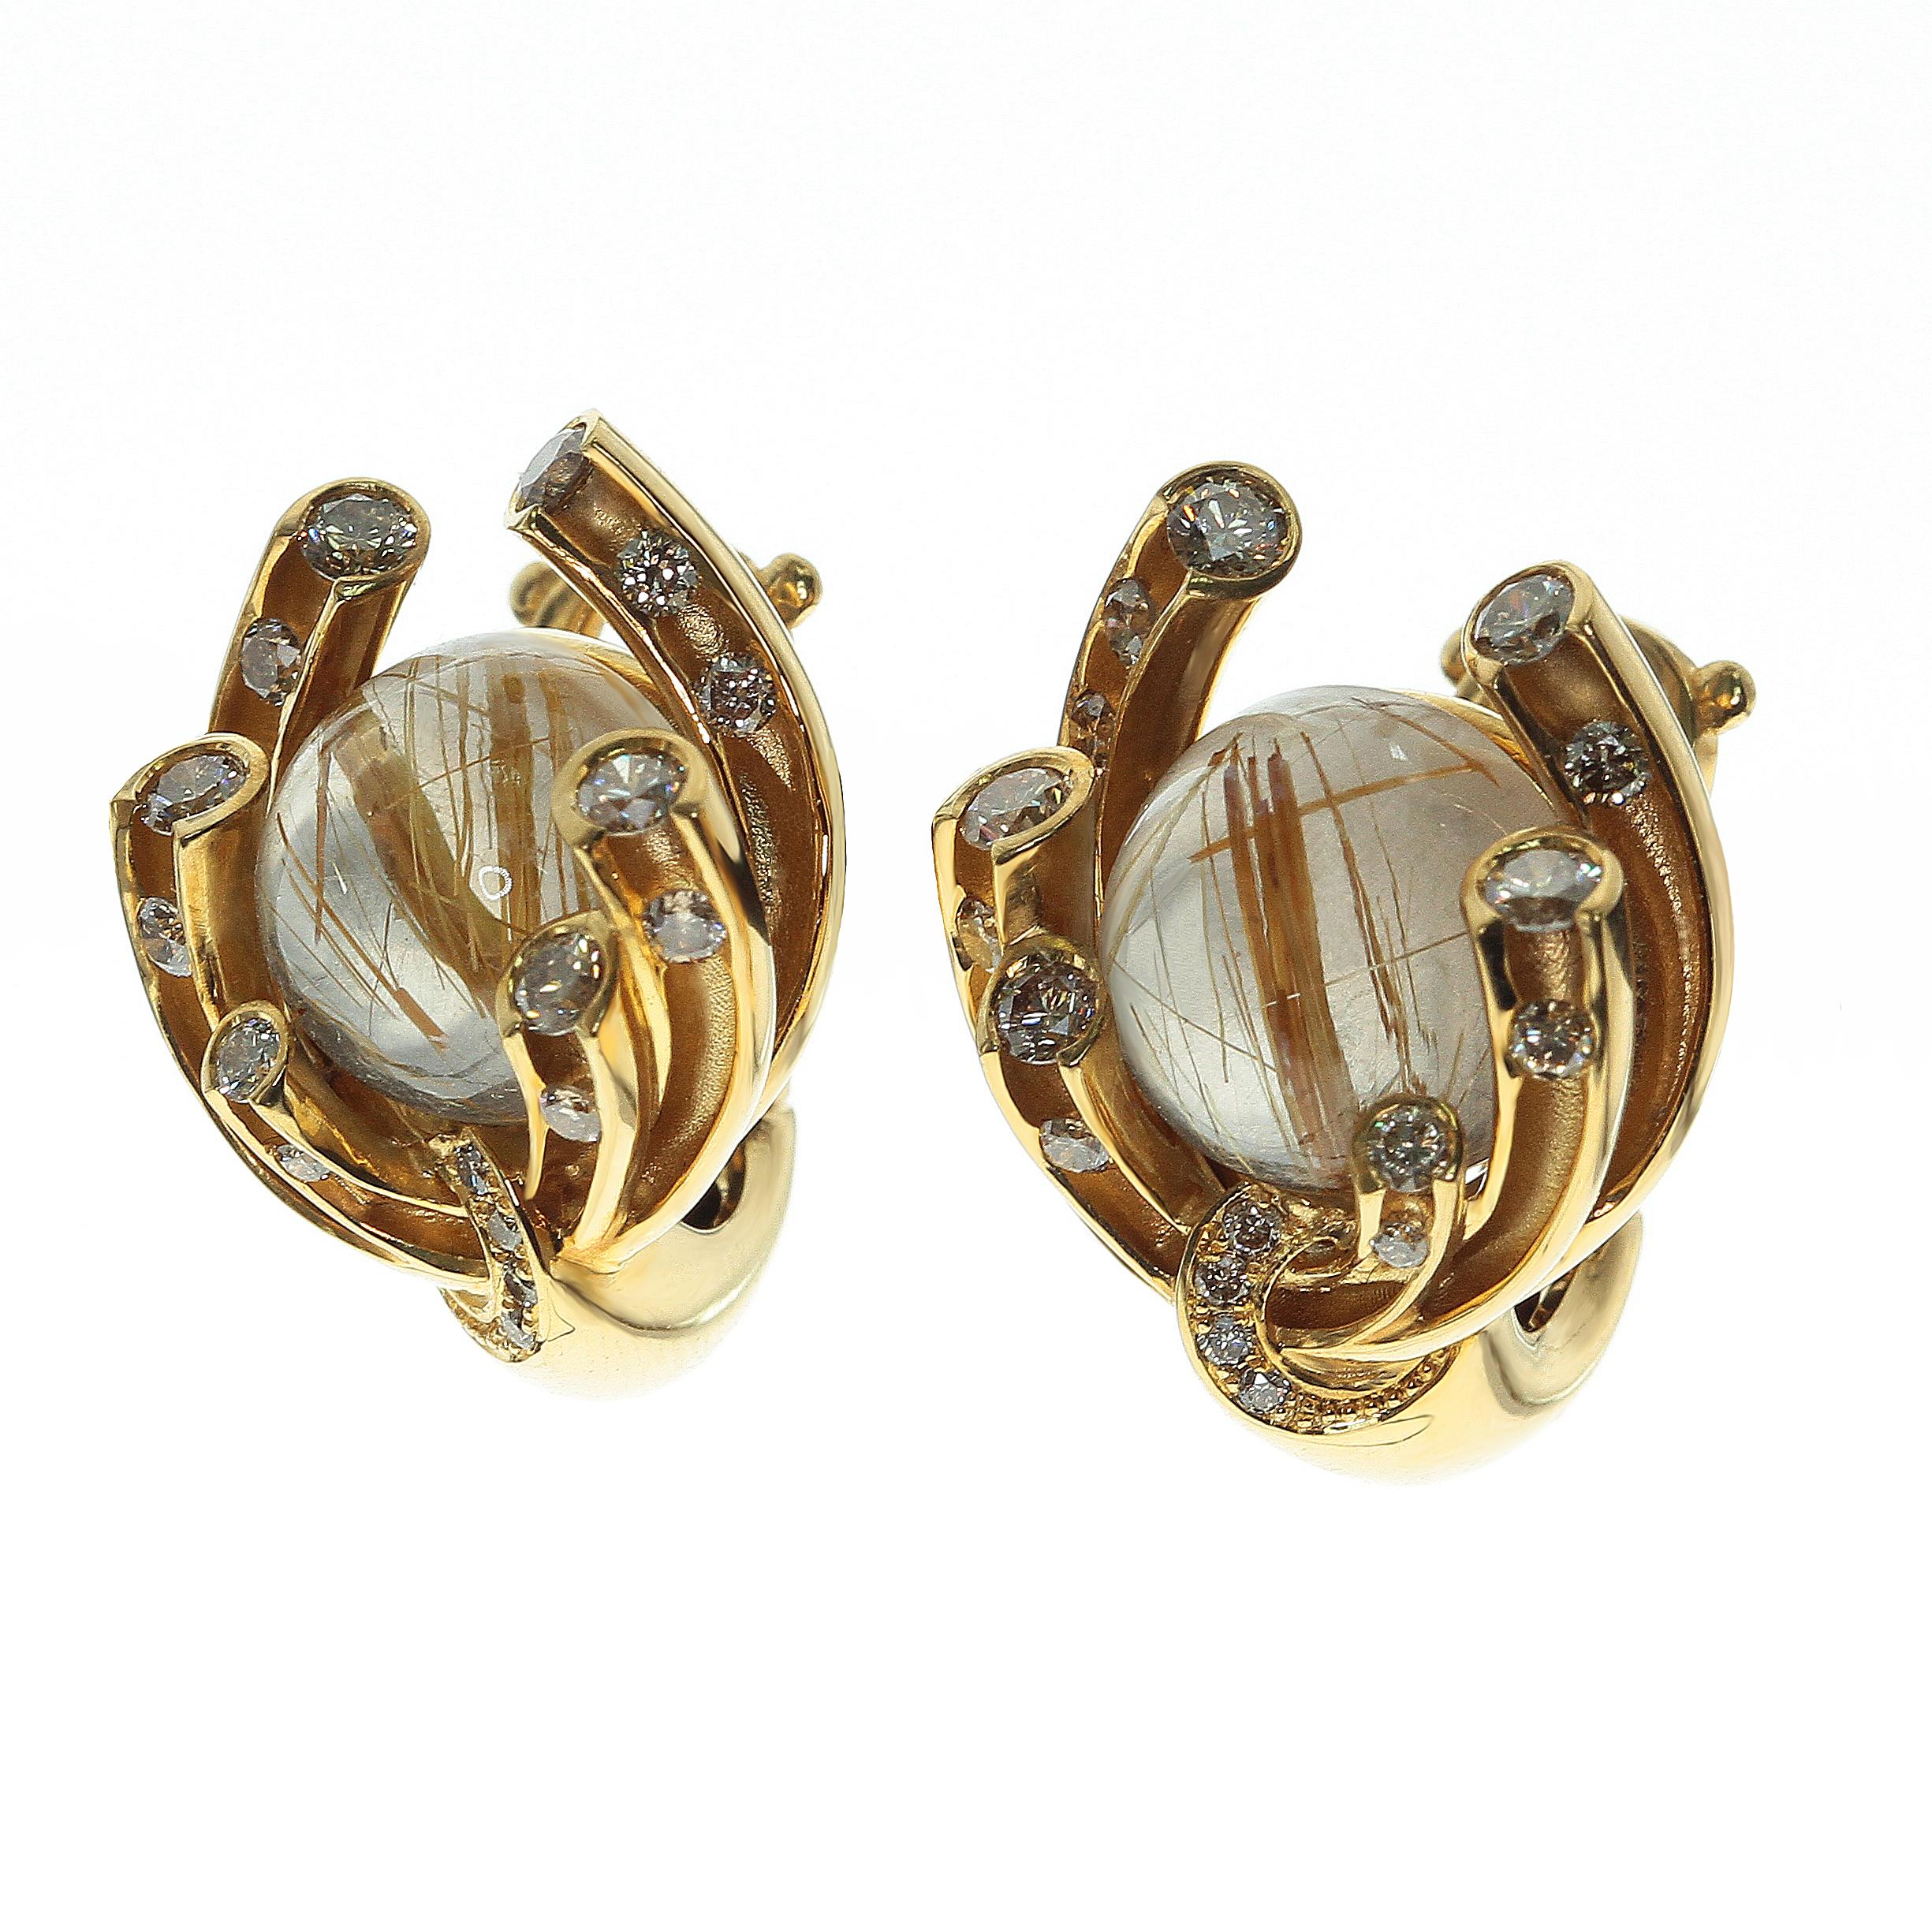 Champagne Diamonds, 6.69Ct Rutilated Quartz, 18 Karat Yellow Gold Earrings
Our designers draw inspiration from everywhere. Also is here. What is interesting in brushwood? And you just imagine how these 2 Rutilated Quartz weighing 6.69Ct endows these